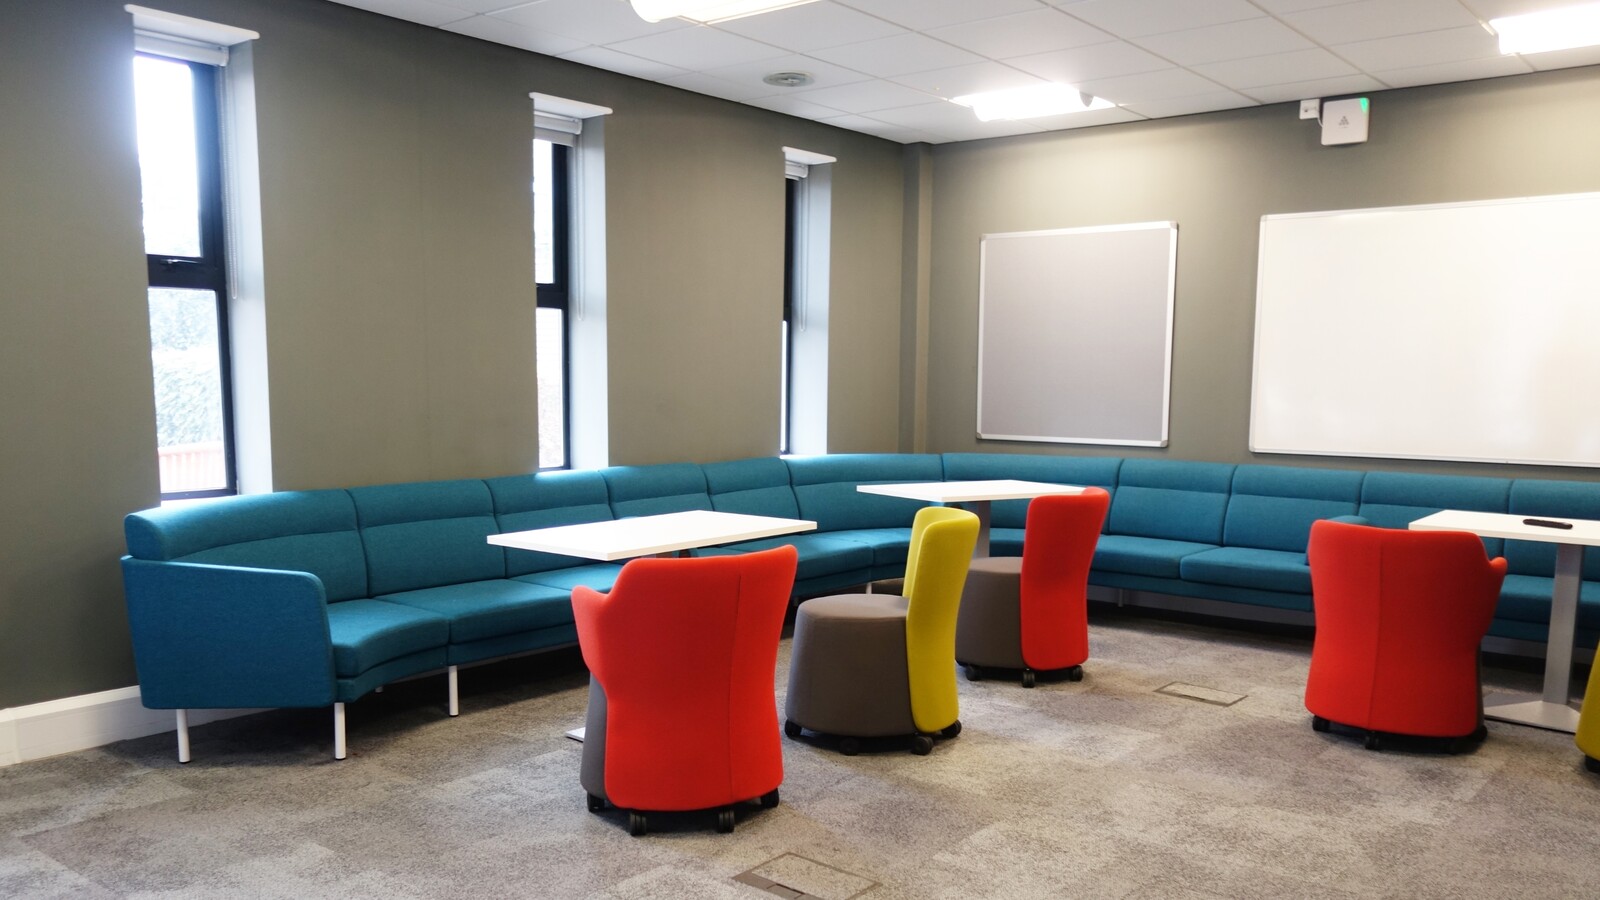 Oxford Brookes University - Wheatley Campus soft seating